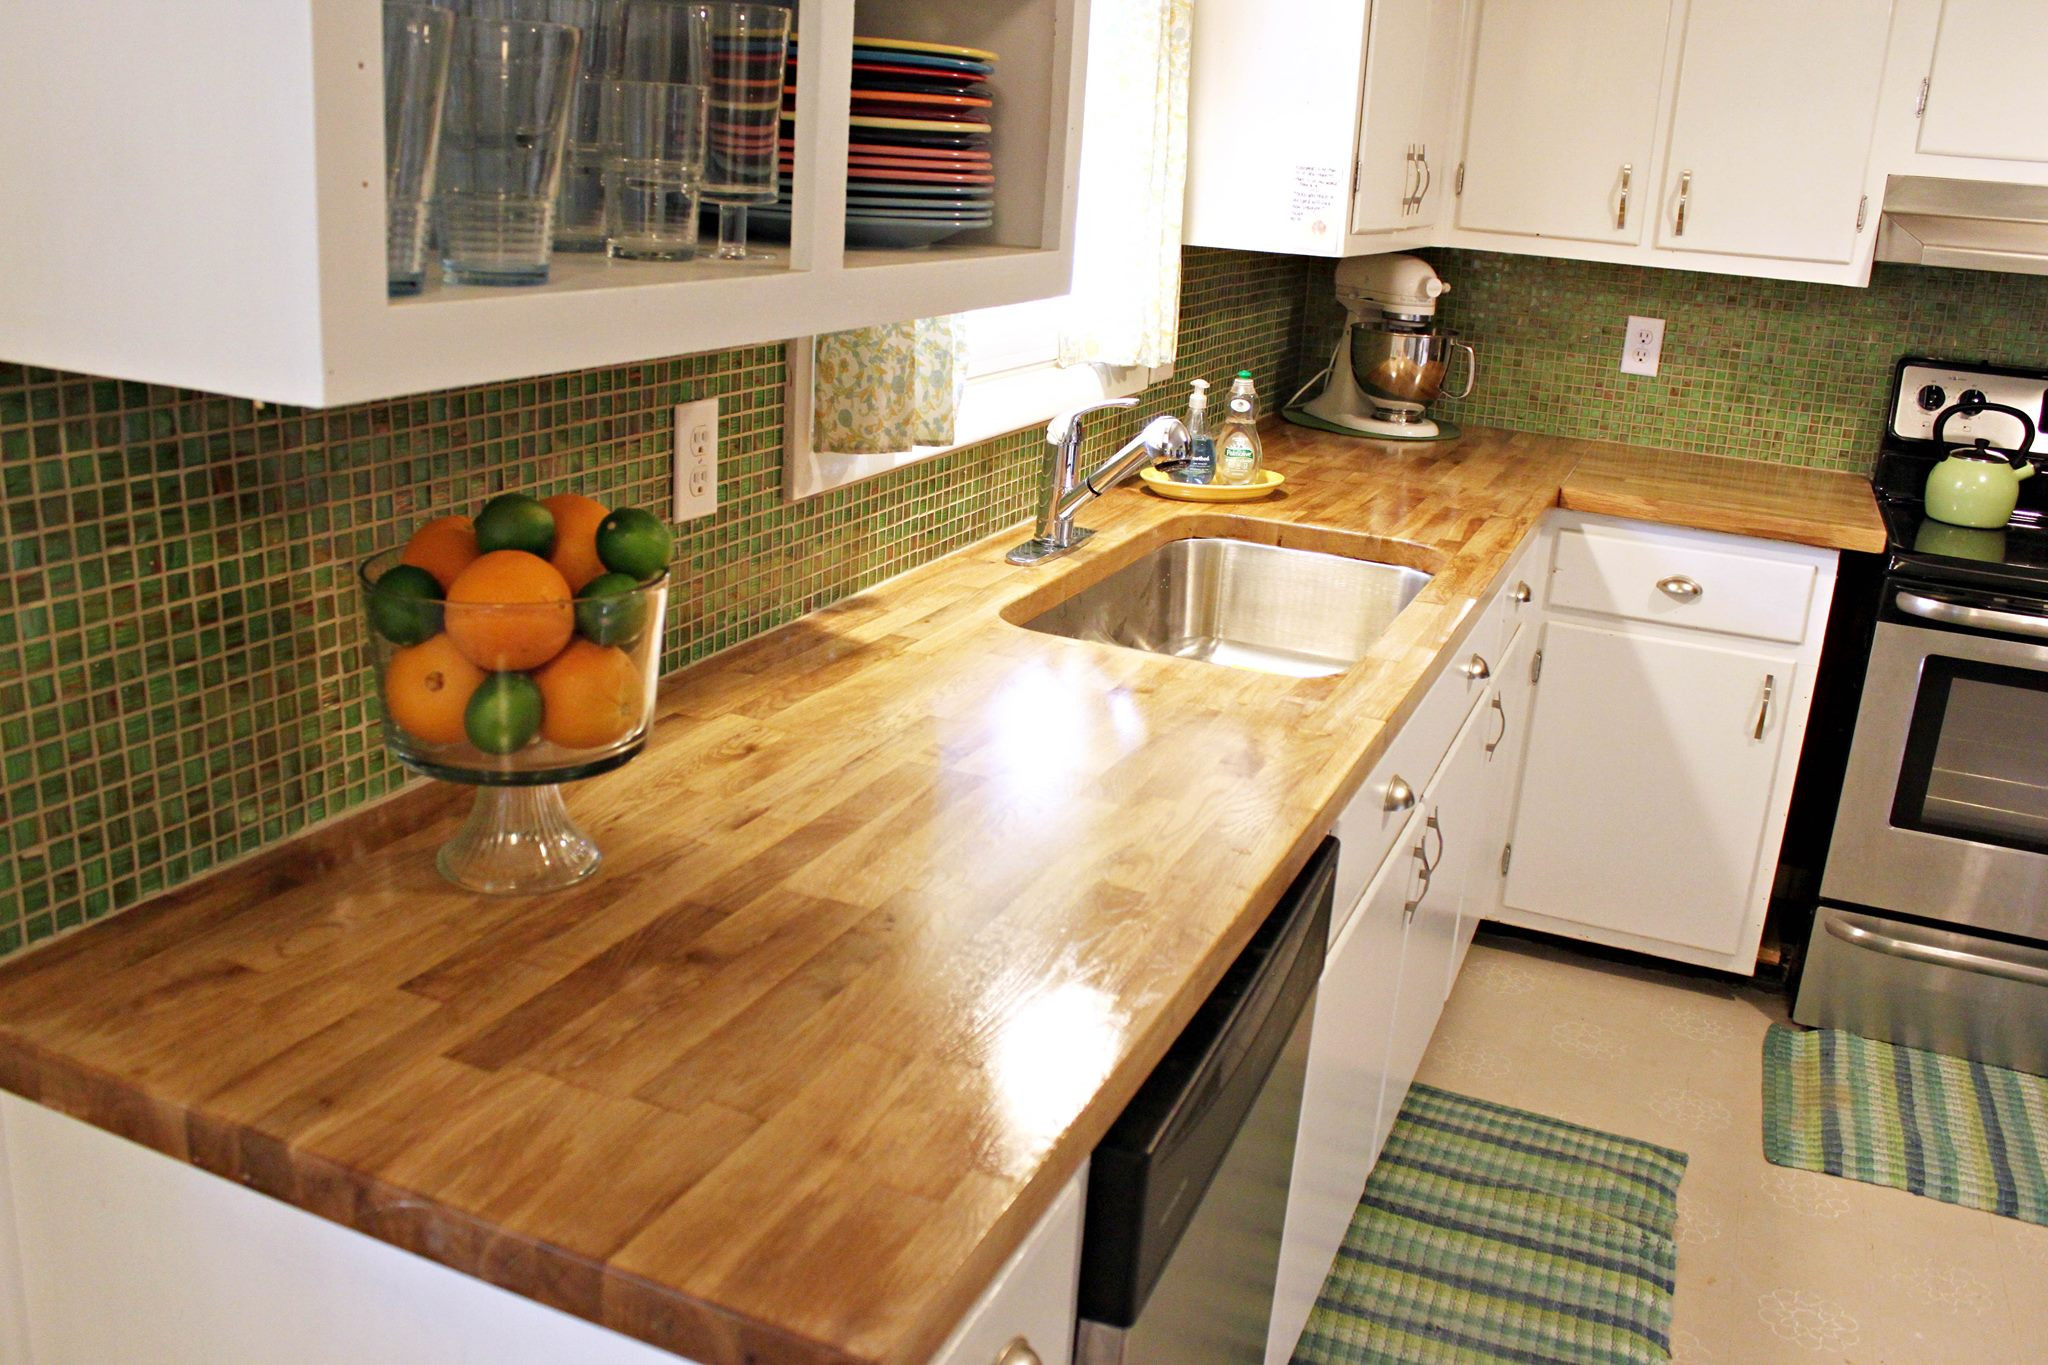 Kitchen Butcher Block Counter
 Kitchen Countertop Buyer s Guide Remodeling Expense